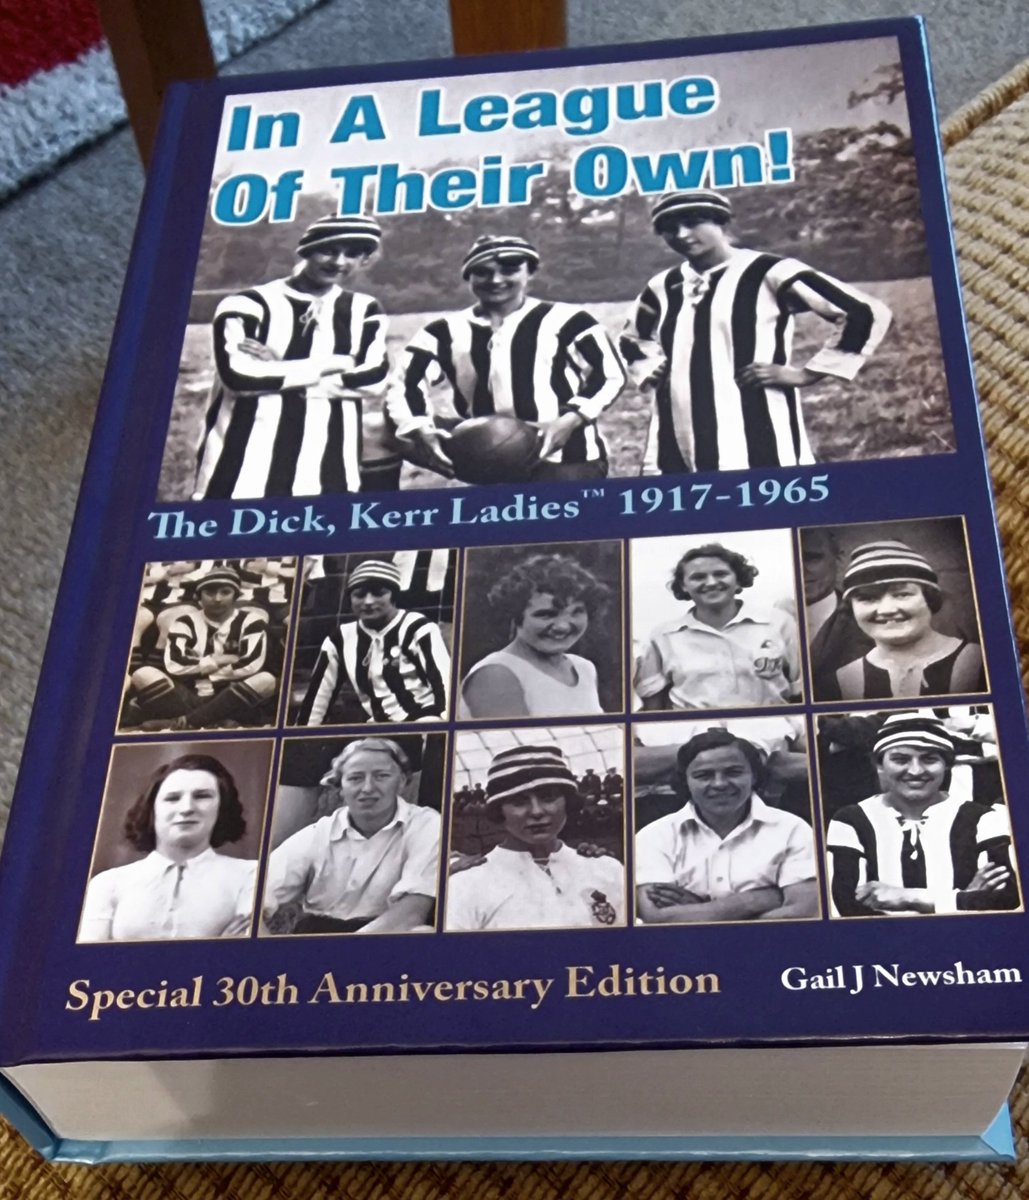 Celebrating the 30th anniversary since 1st publication with a special edition available now; Includes some more info & pics. Special edition not printed on general covers, only for sponsor, but all content the same in both hardback and paperback. #DKLLegends